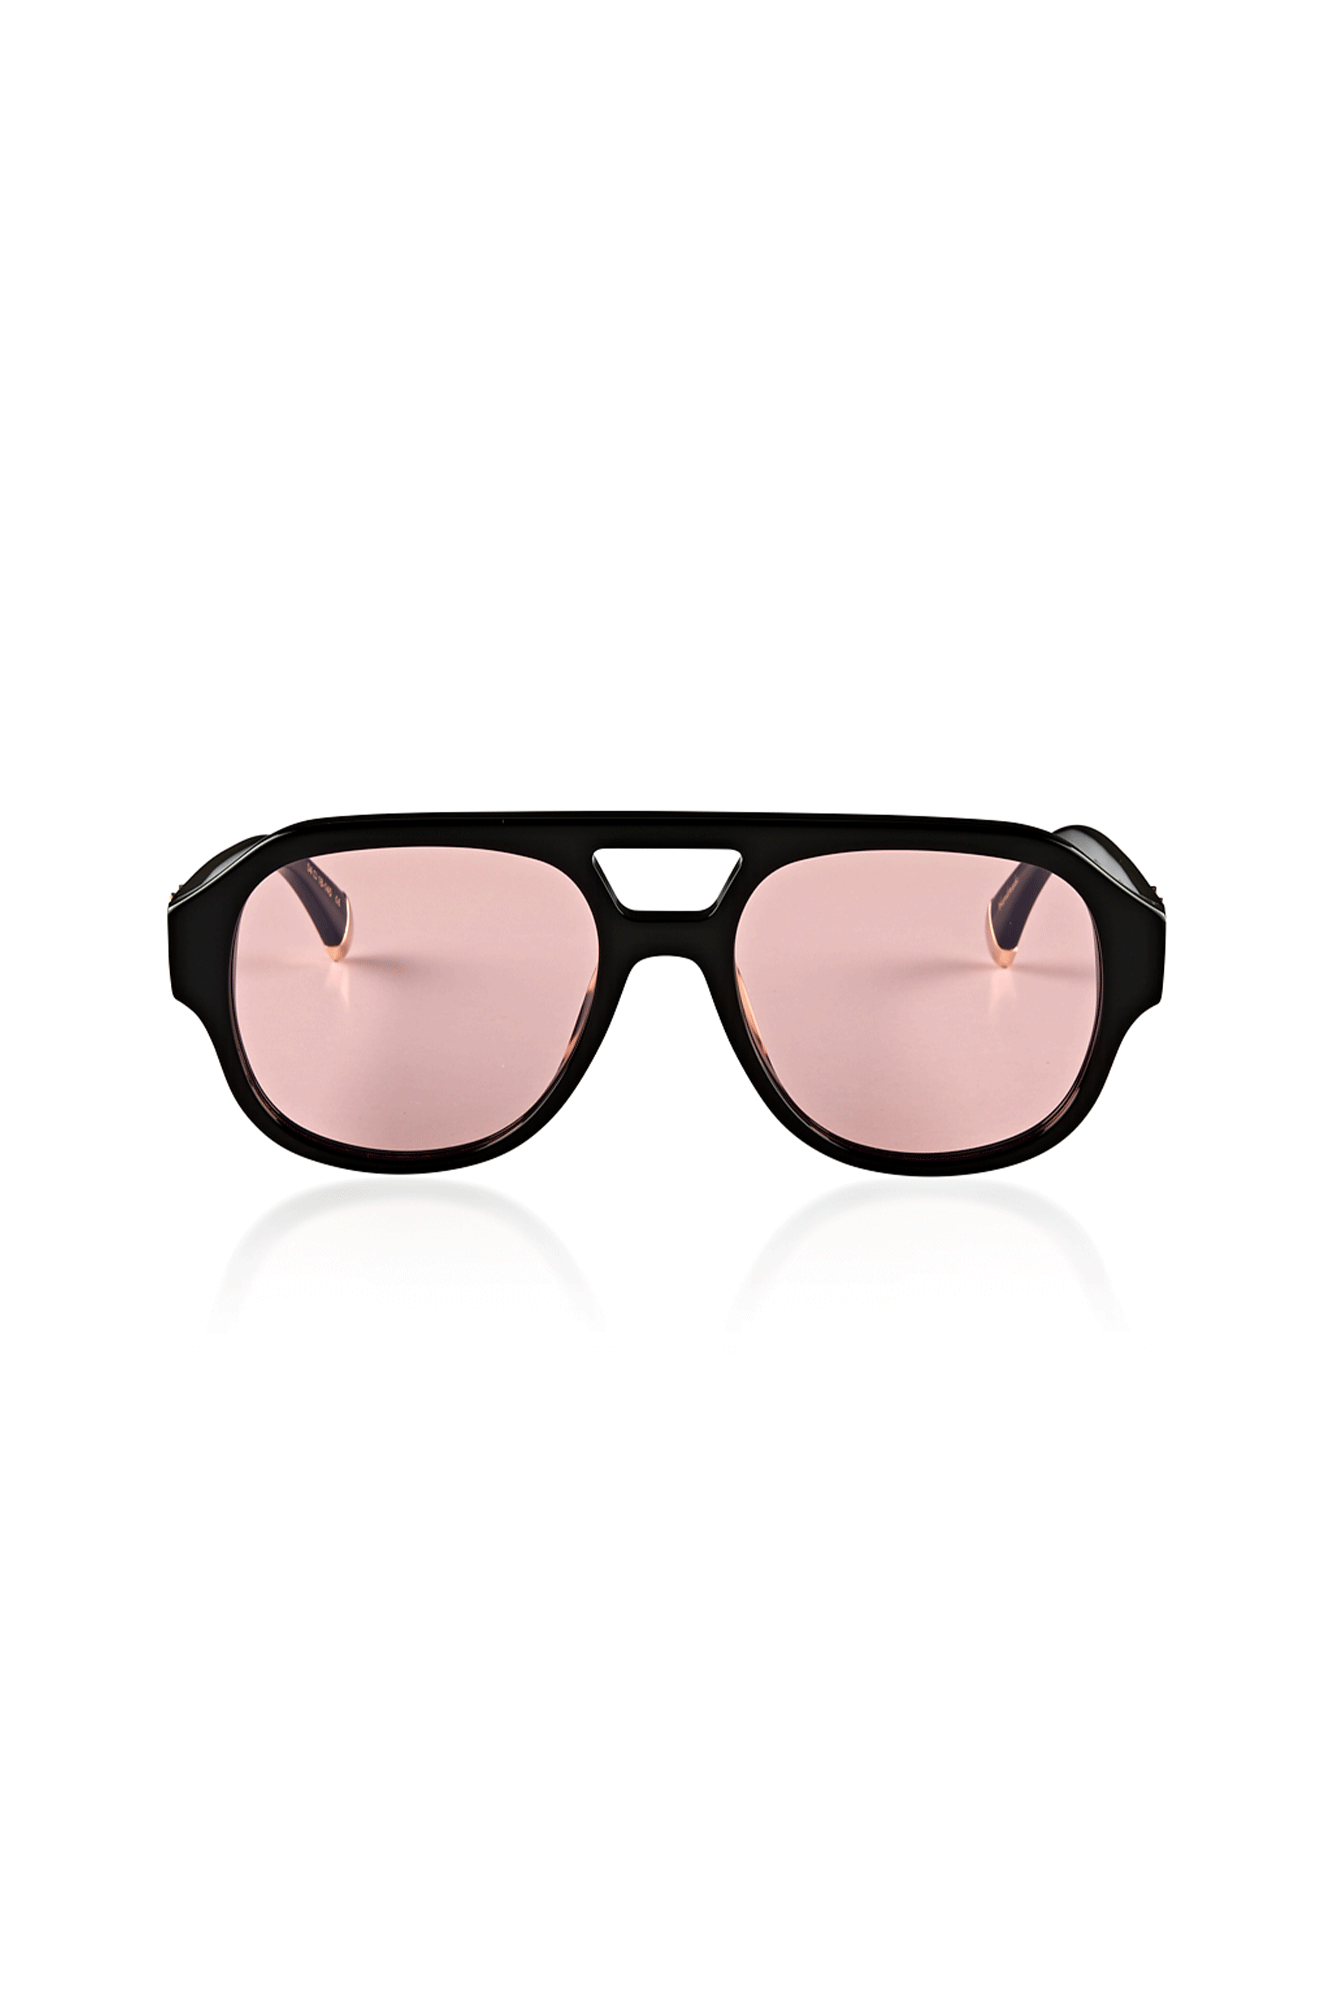 The Le Style Gloss Black - Pink Lens from Oscar x Frank is perfect for both men or women looking to make a statement. This handcrafted frame is made of Italian acetate, has an oversized X logo, and 24K gold temple tips. Its unique lenses can transform from pink to grey in direct sunlight, offering maximum sun protection all while staying fashion-forward. 100% designed in-house.